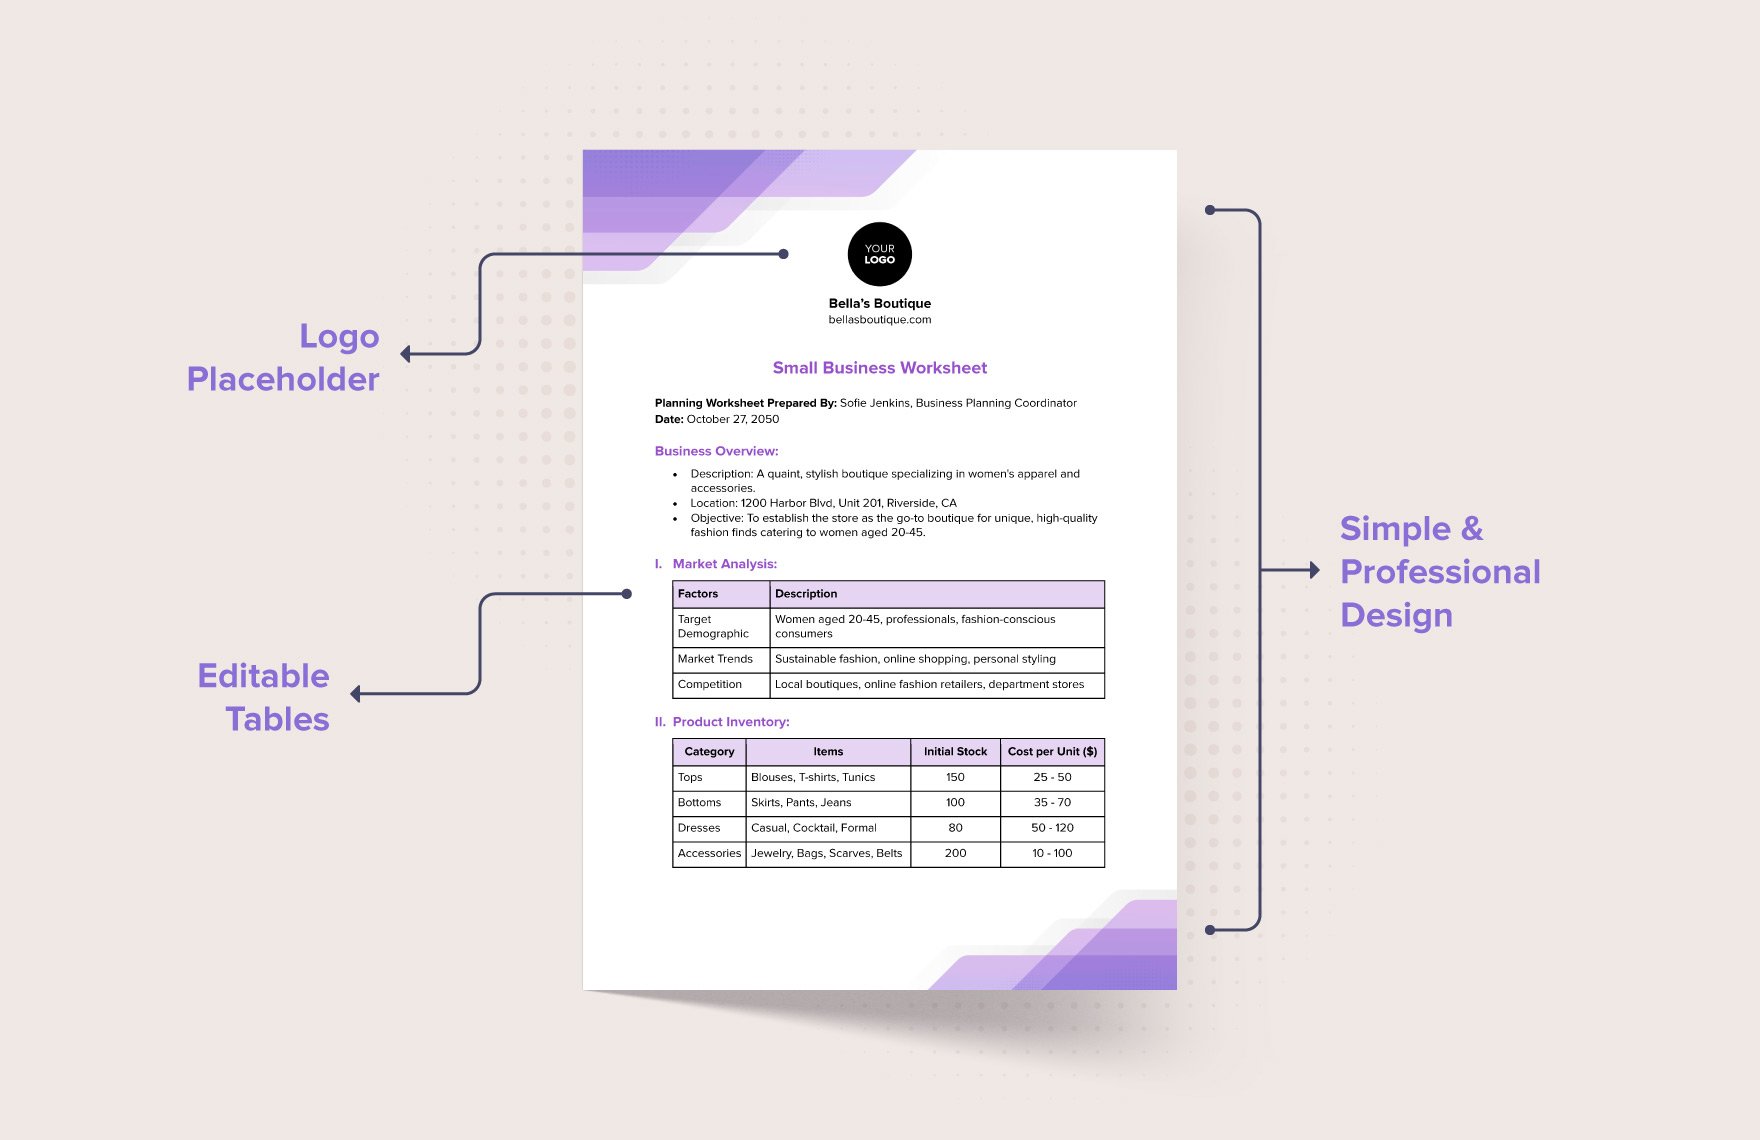 Small Business Worksheet Template